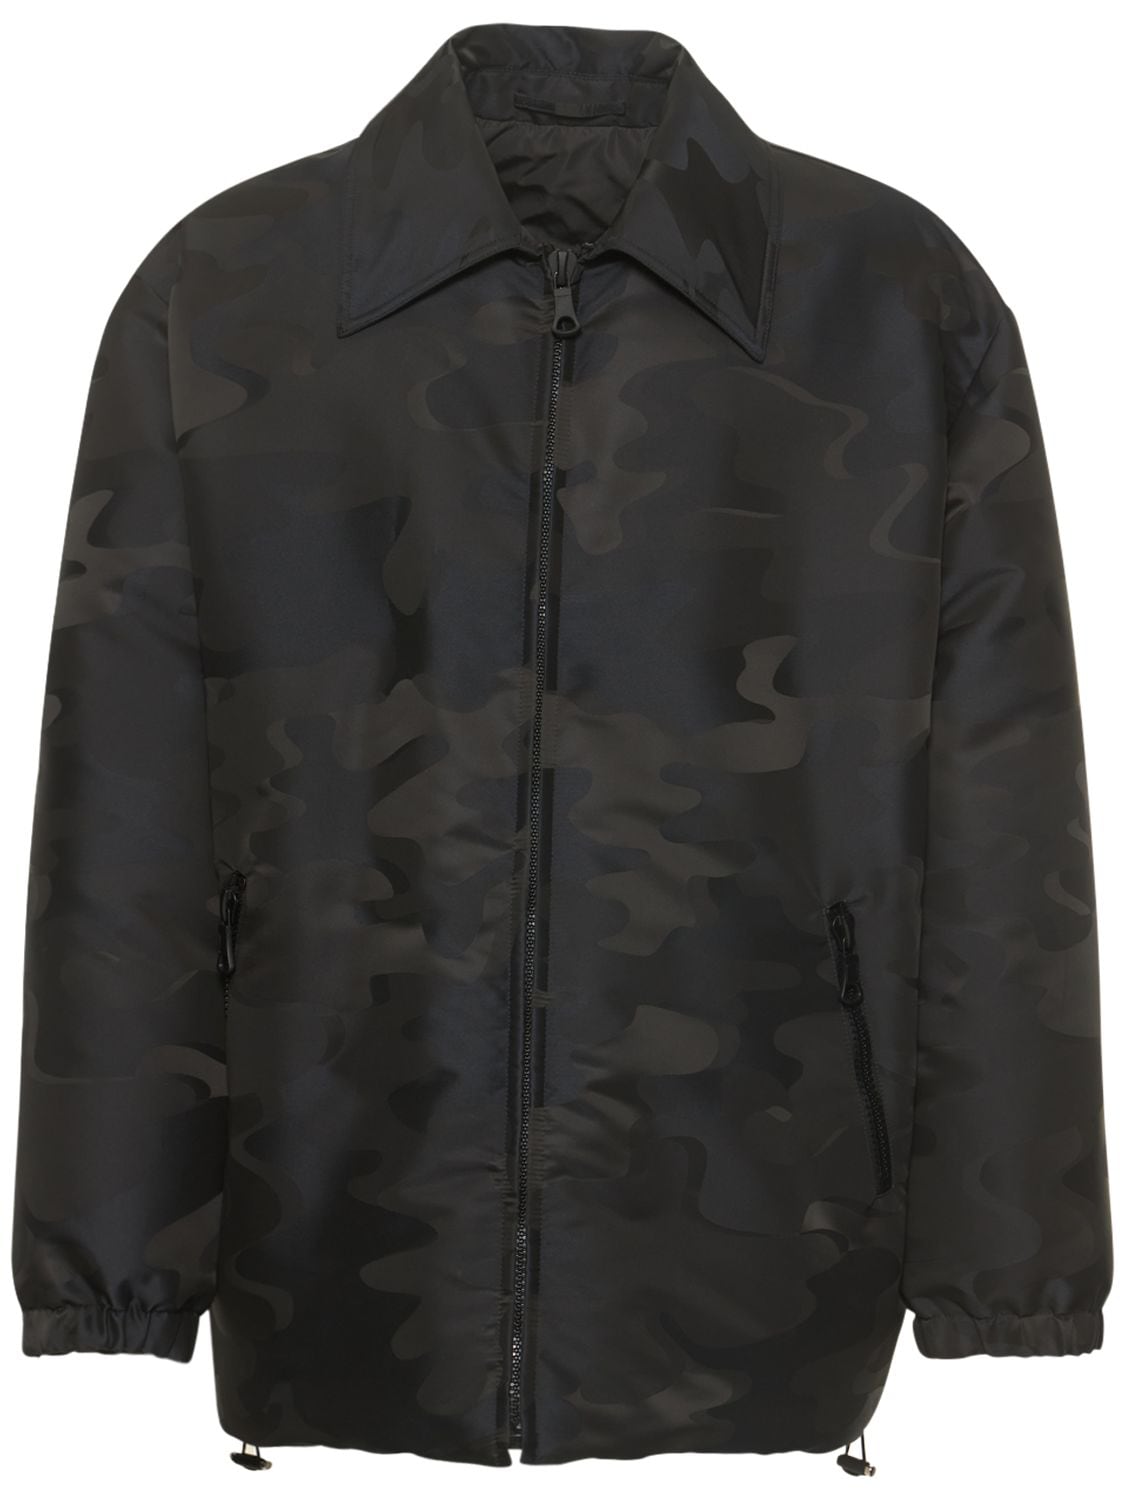 Reversible Camo Print Puffer Jacket | The Hoxton Trend